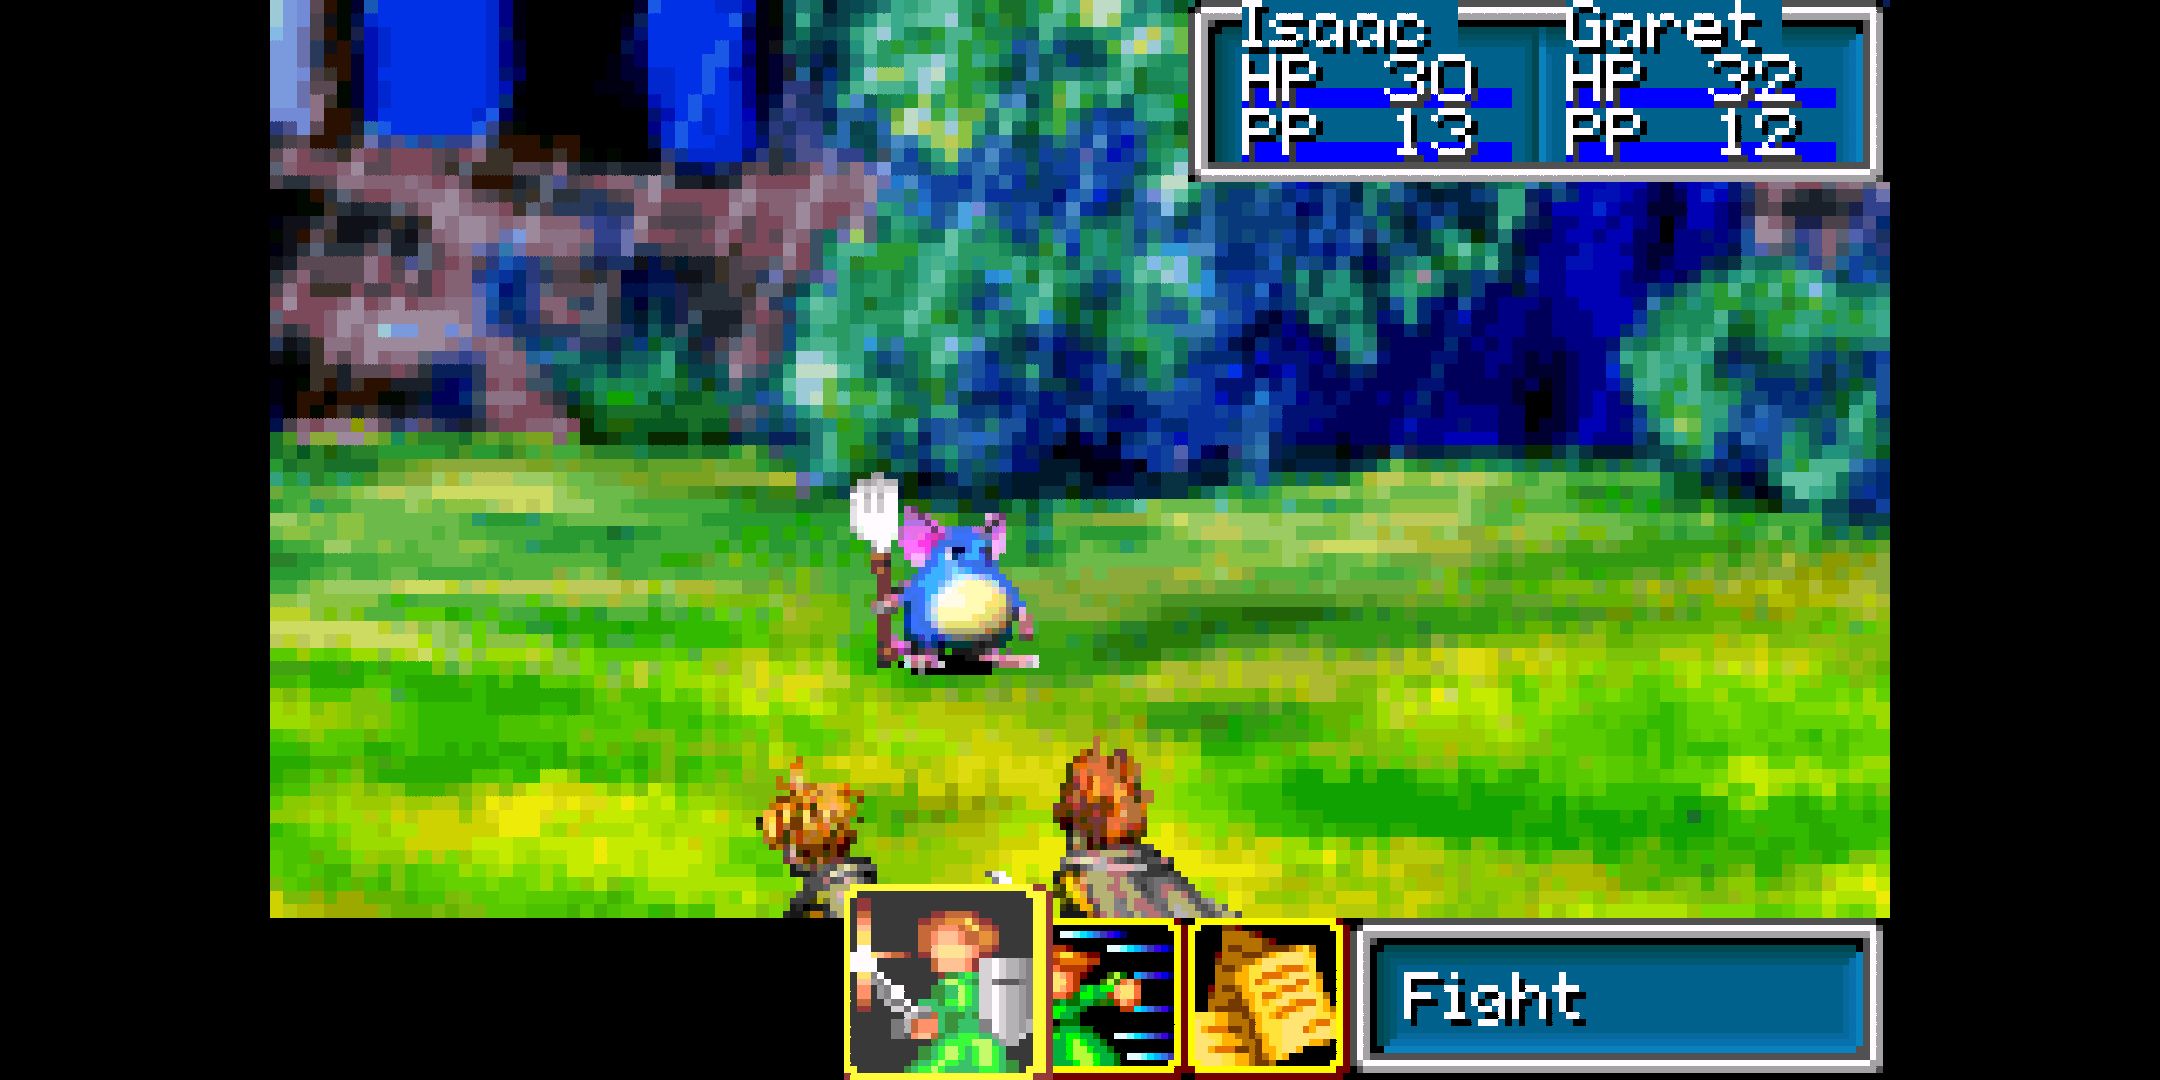 Isaac and Garet fight a mouse-like enemy in Golden Sun